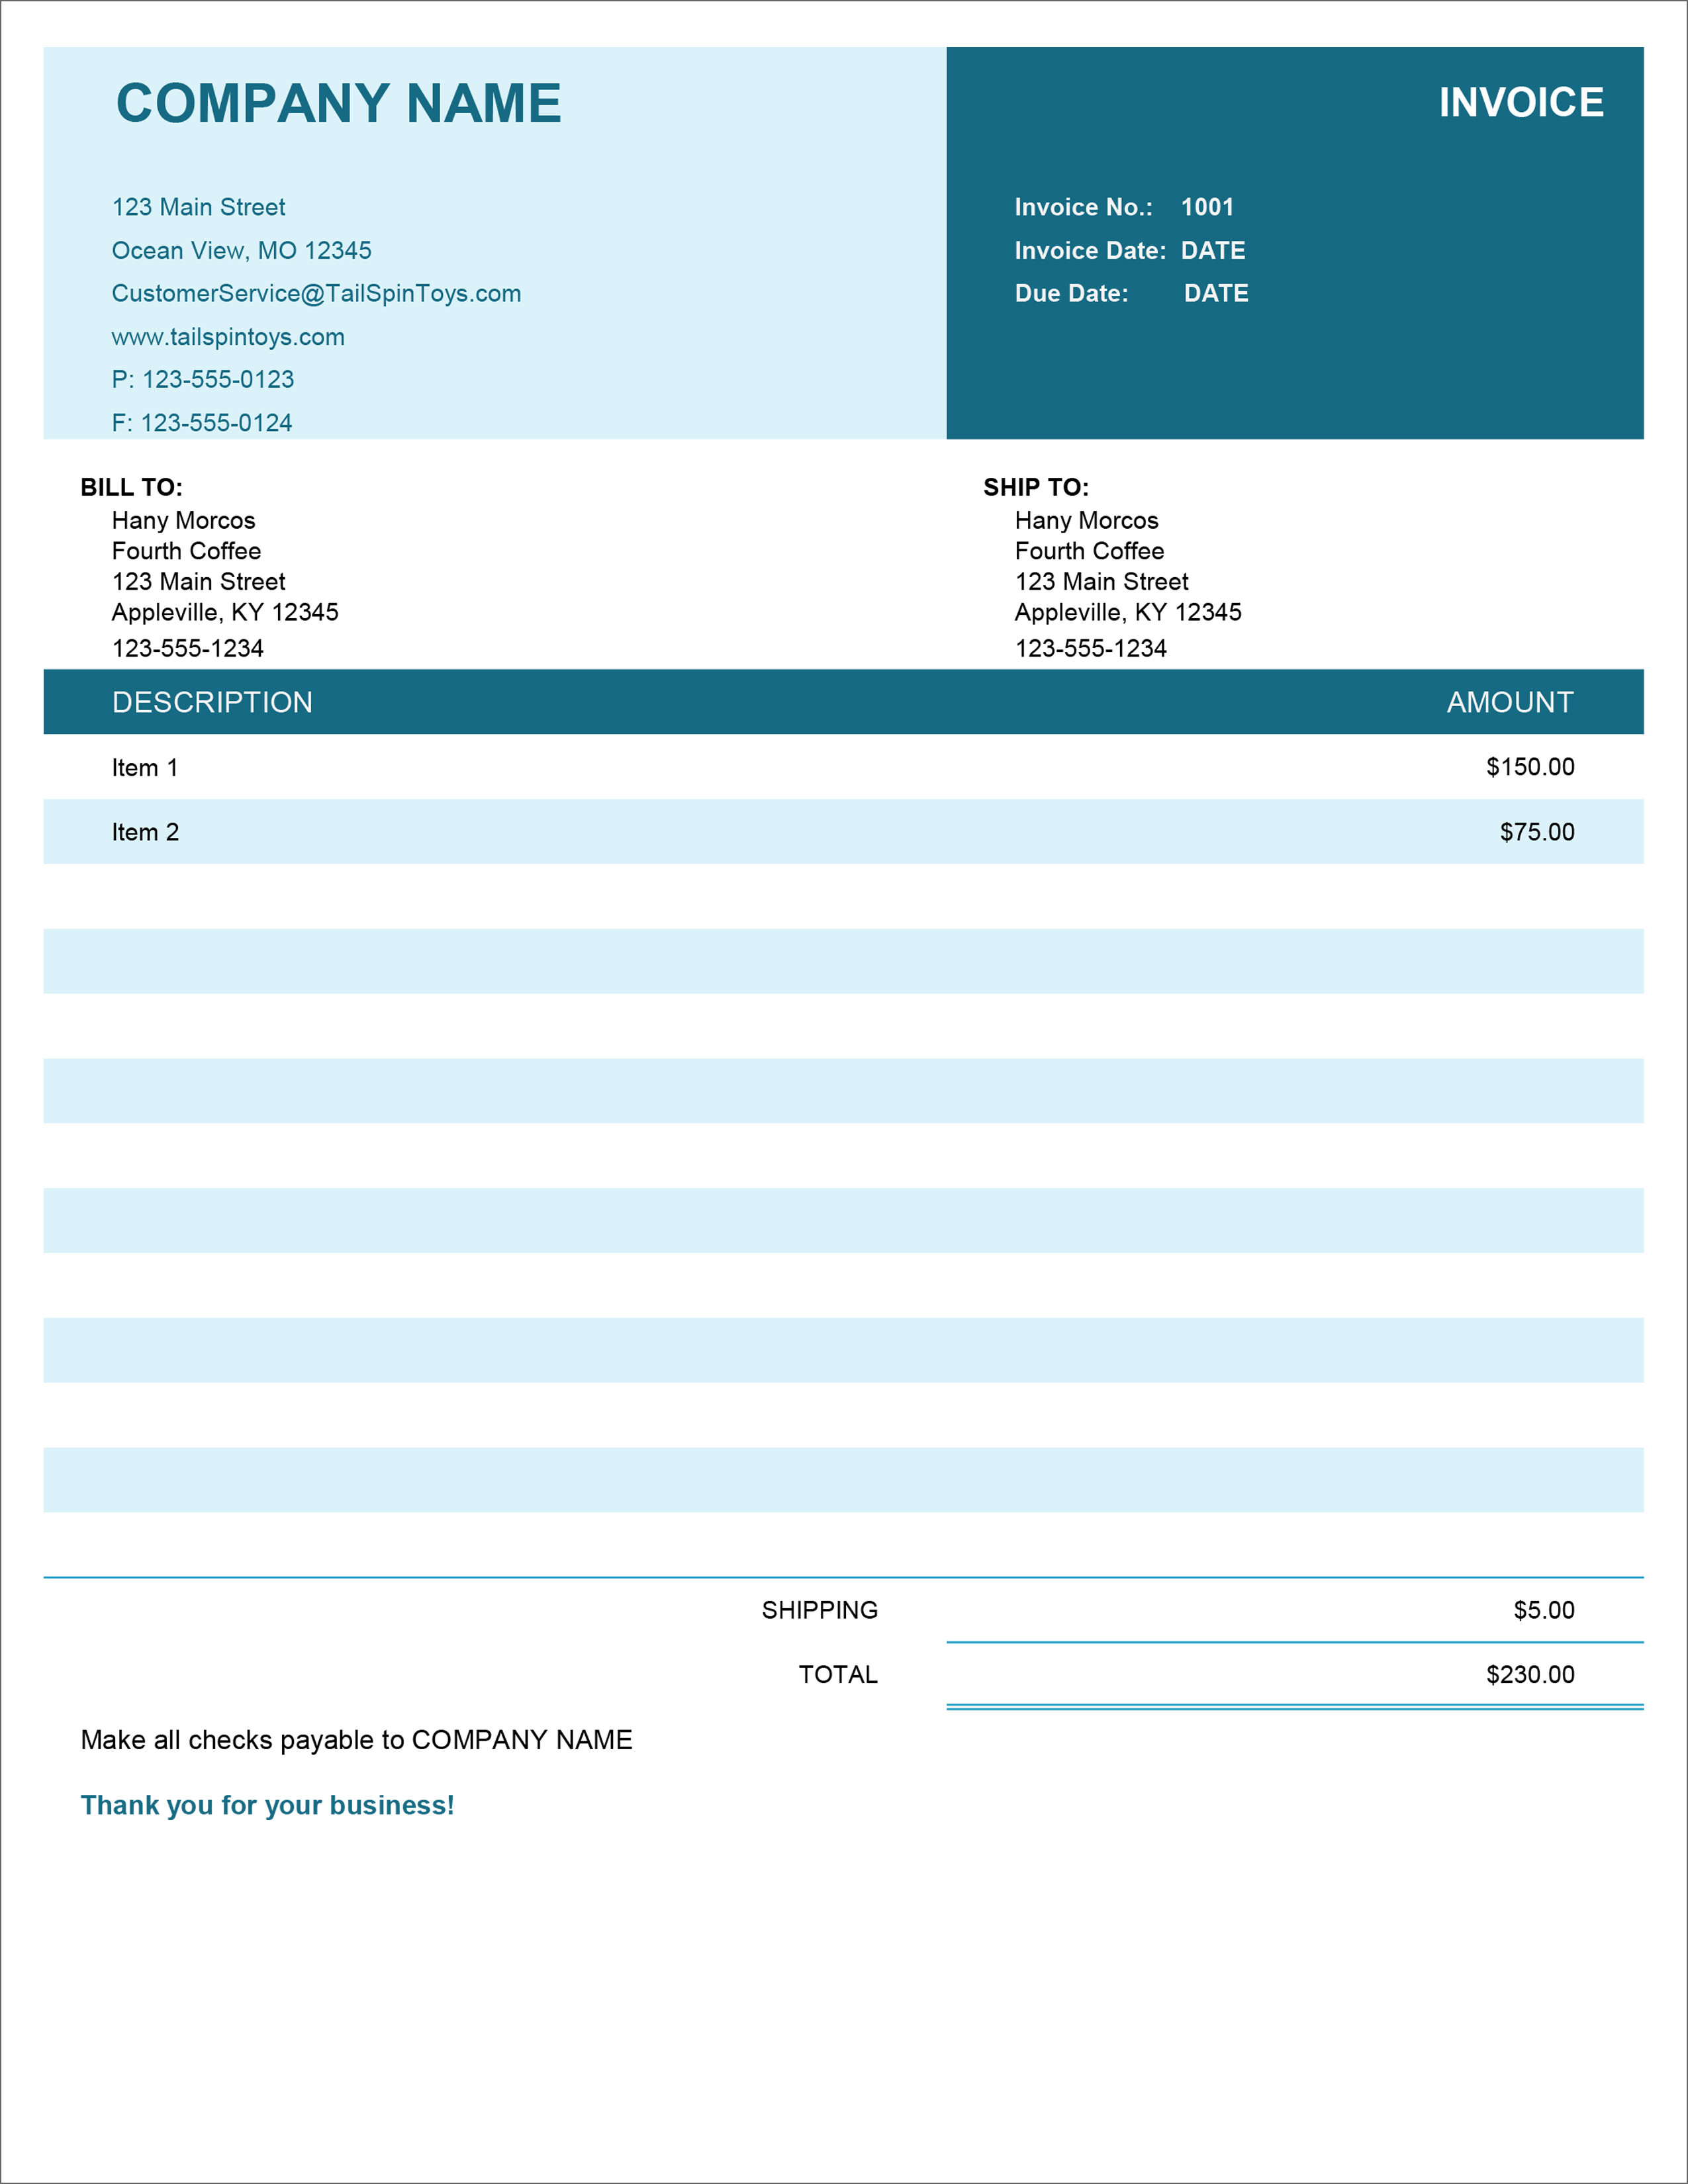 Get Excel Invoice Template Excel Pictures